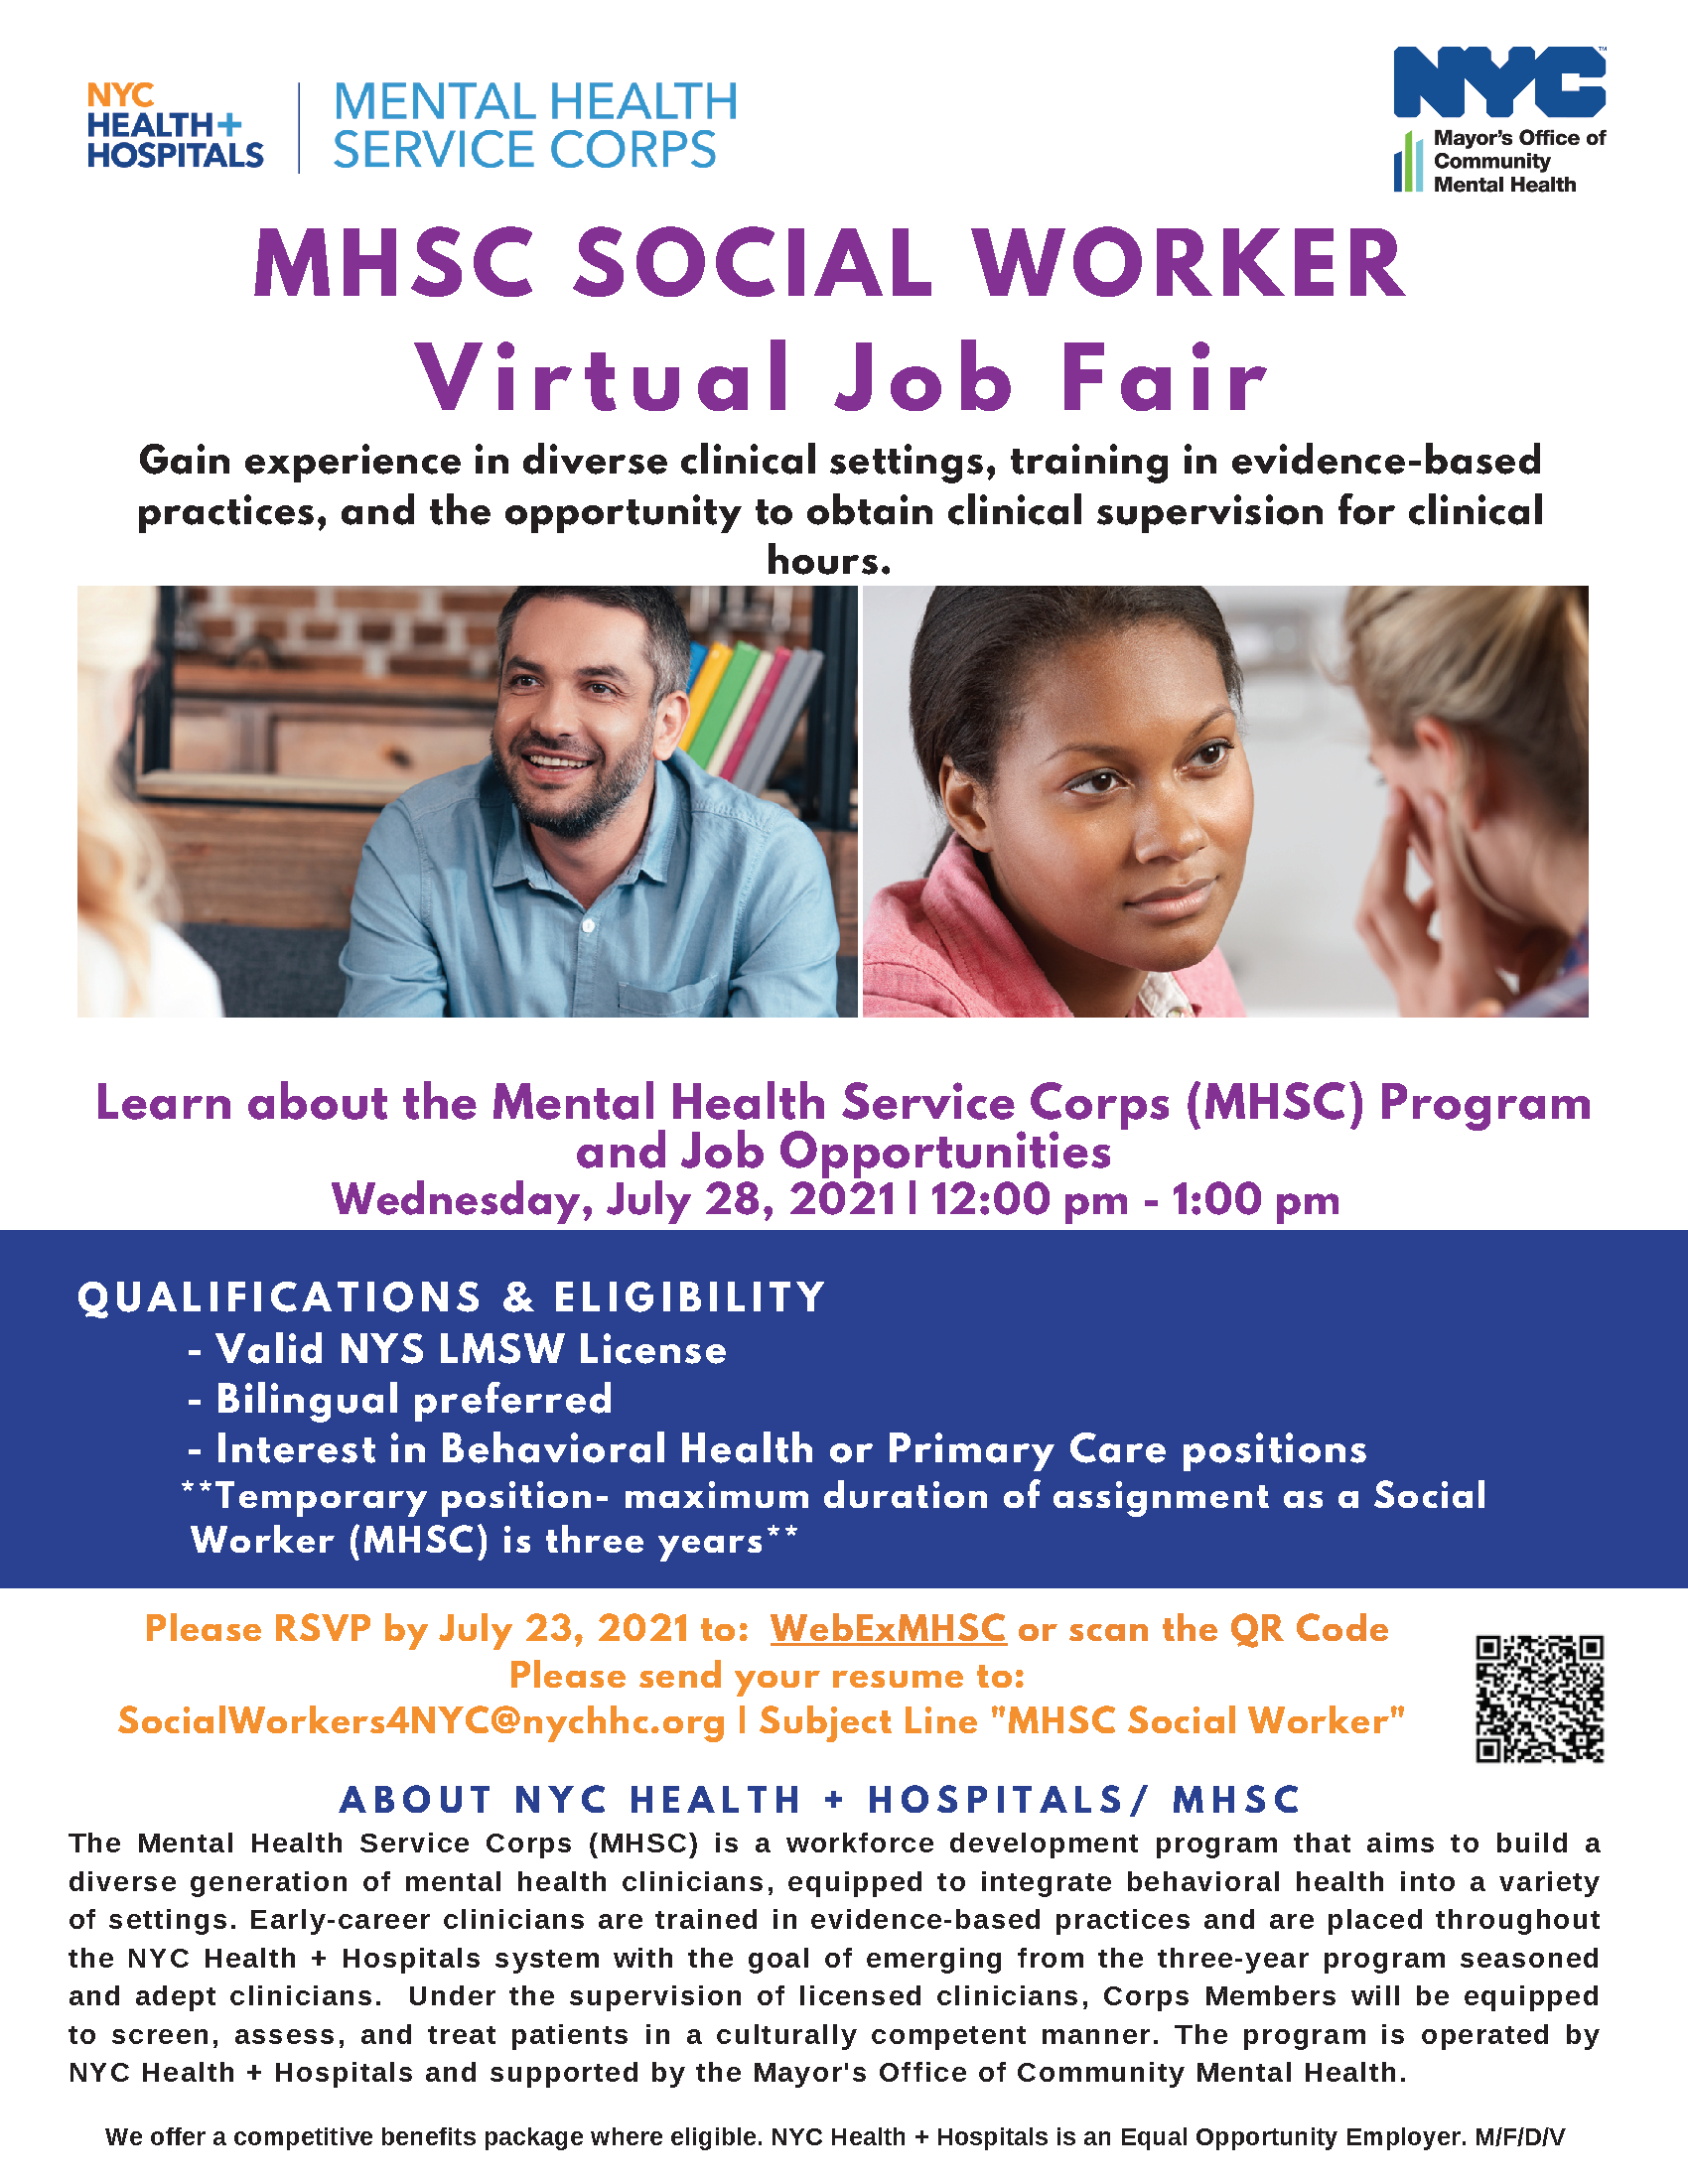 Job Fair flyer titled MHSC Social Worker Virtual Job Fair with description about benefits of program, qualifications and eligibility, and steps for registering for their fair